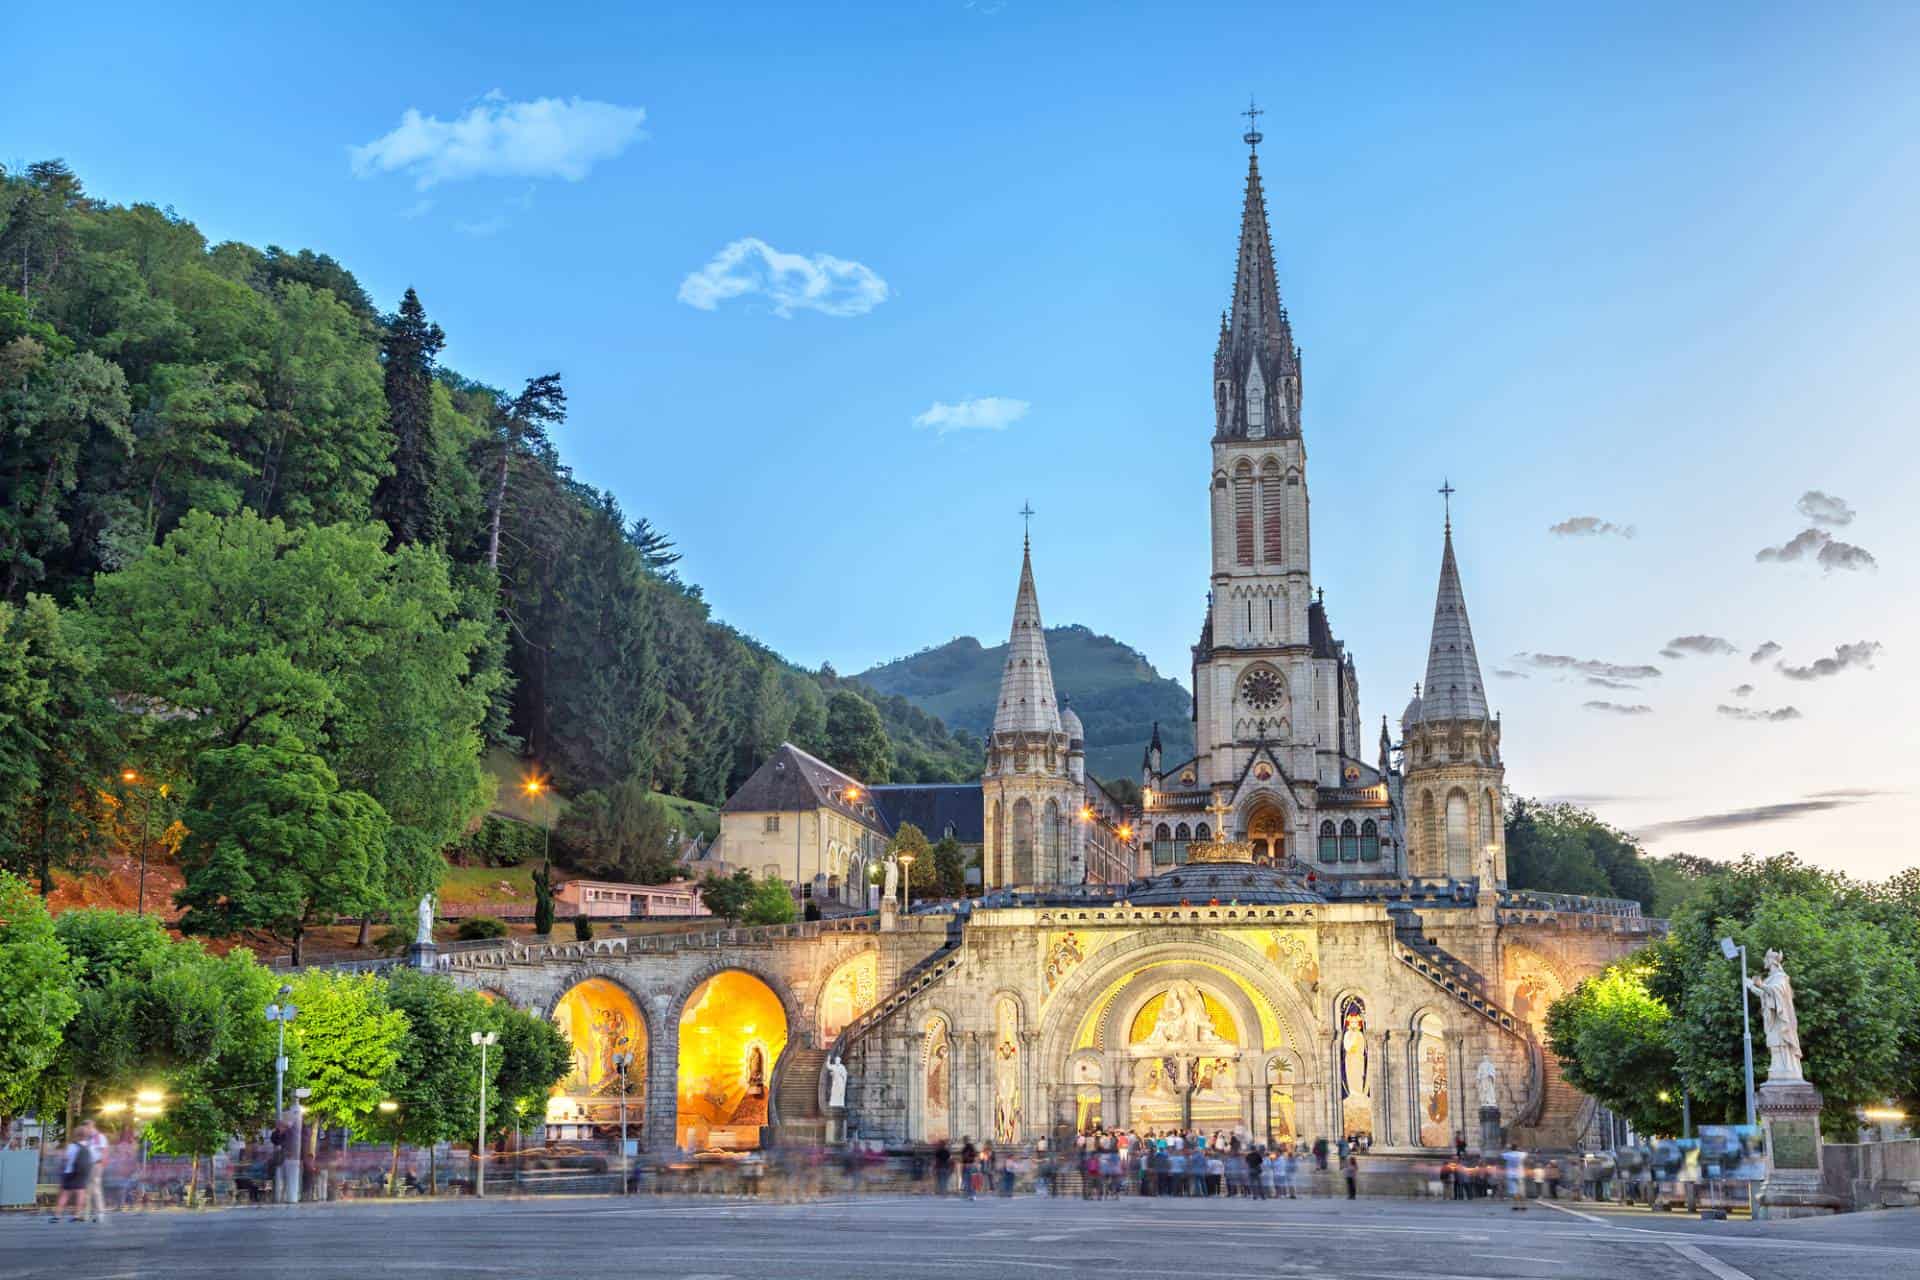 What are the top pilgrimage sites of Europe and where are they?